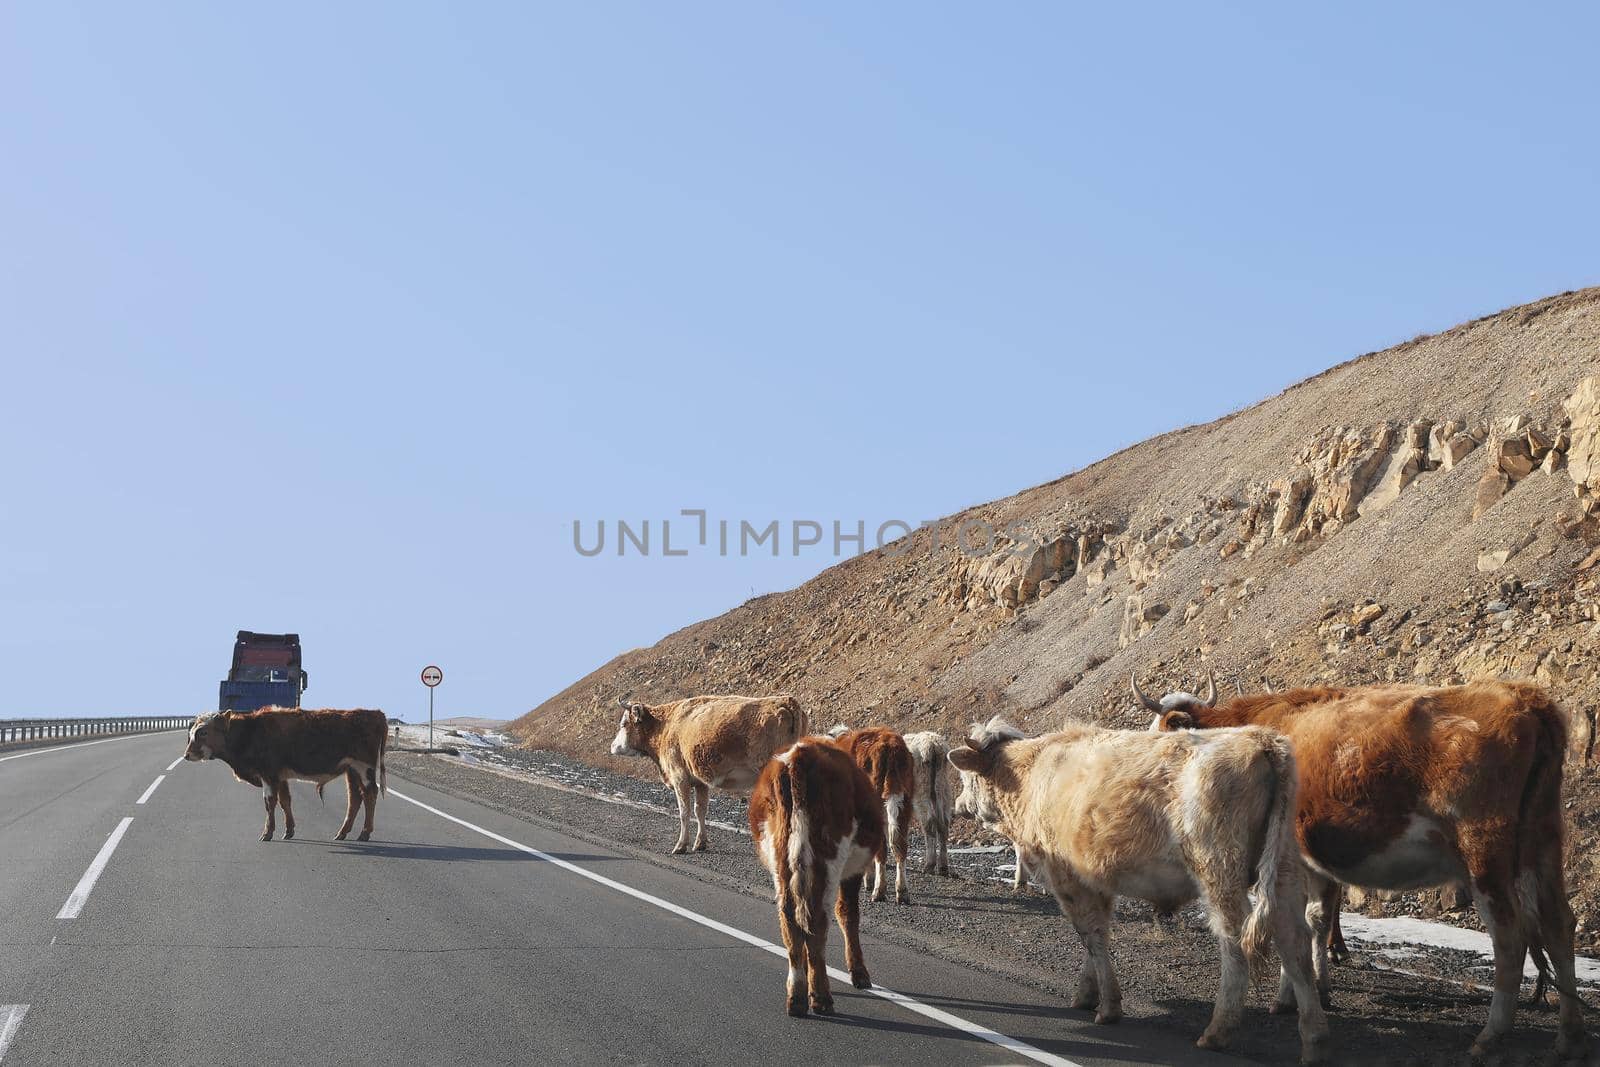 small herd of cows crosses the road on which heavy vehicles move